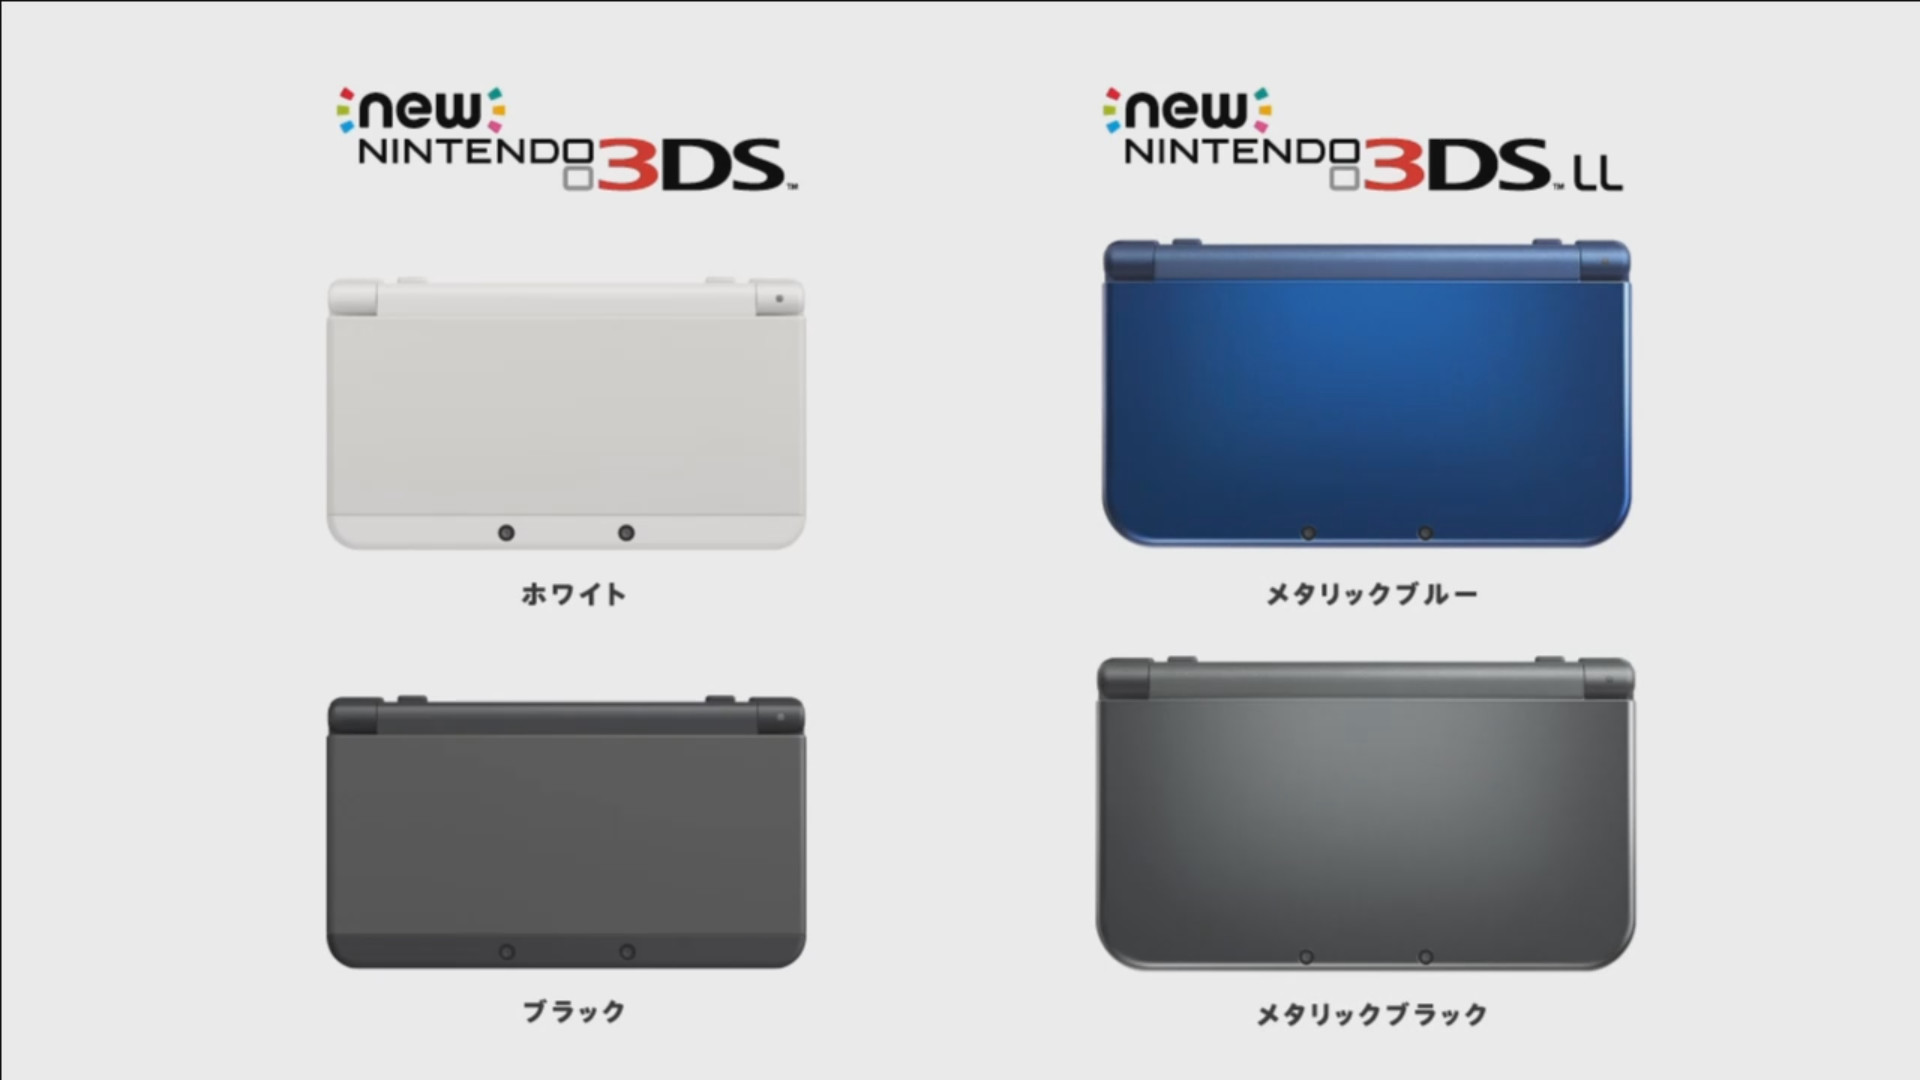 1920x1080 The New Nintendo 3DS is coming soon!